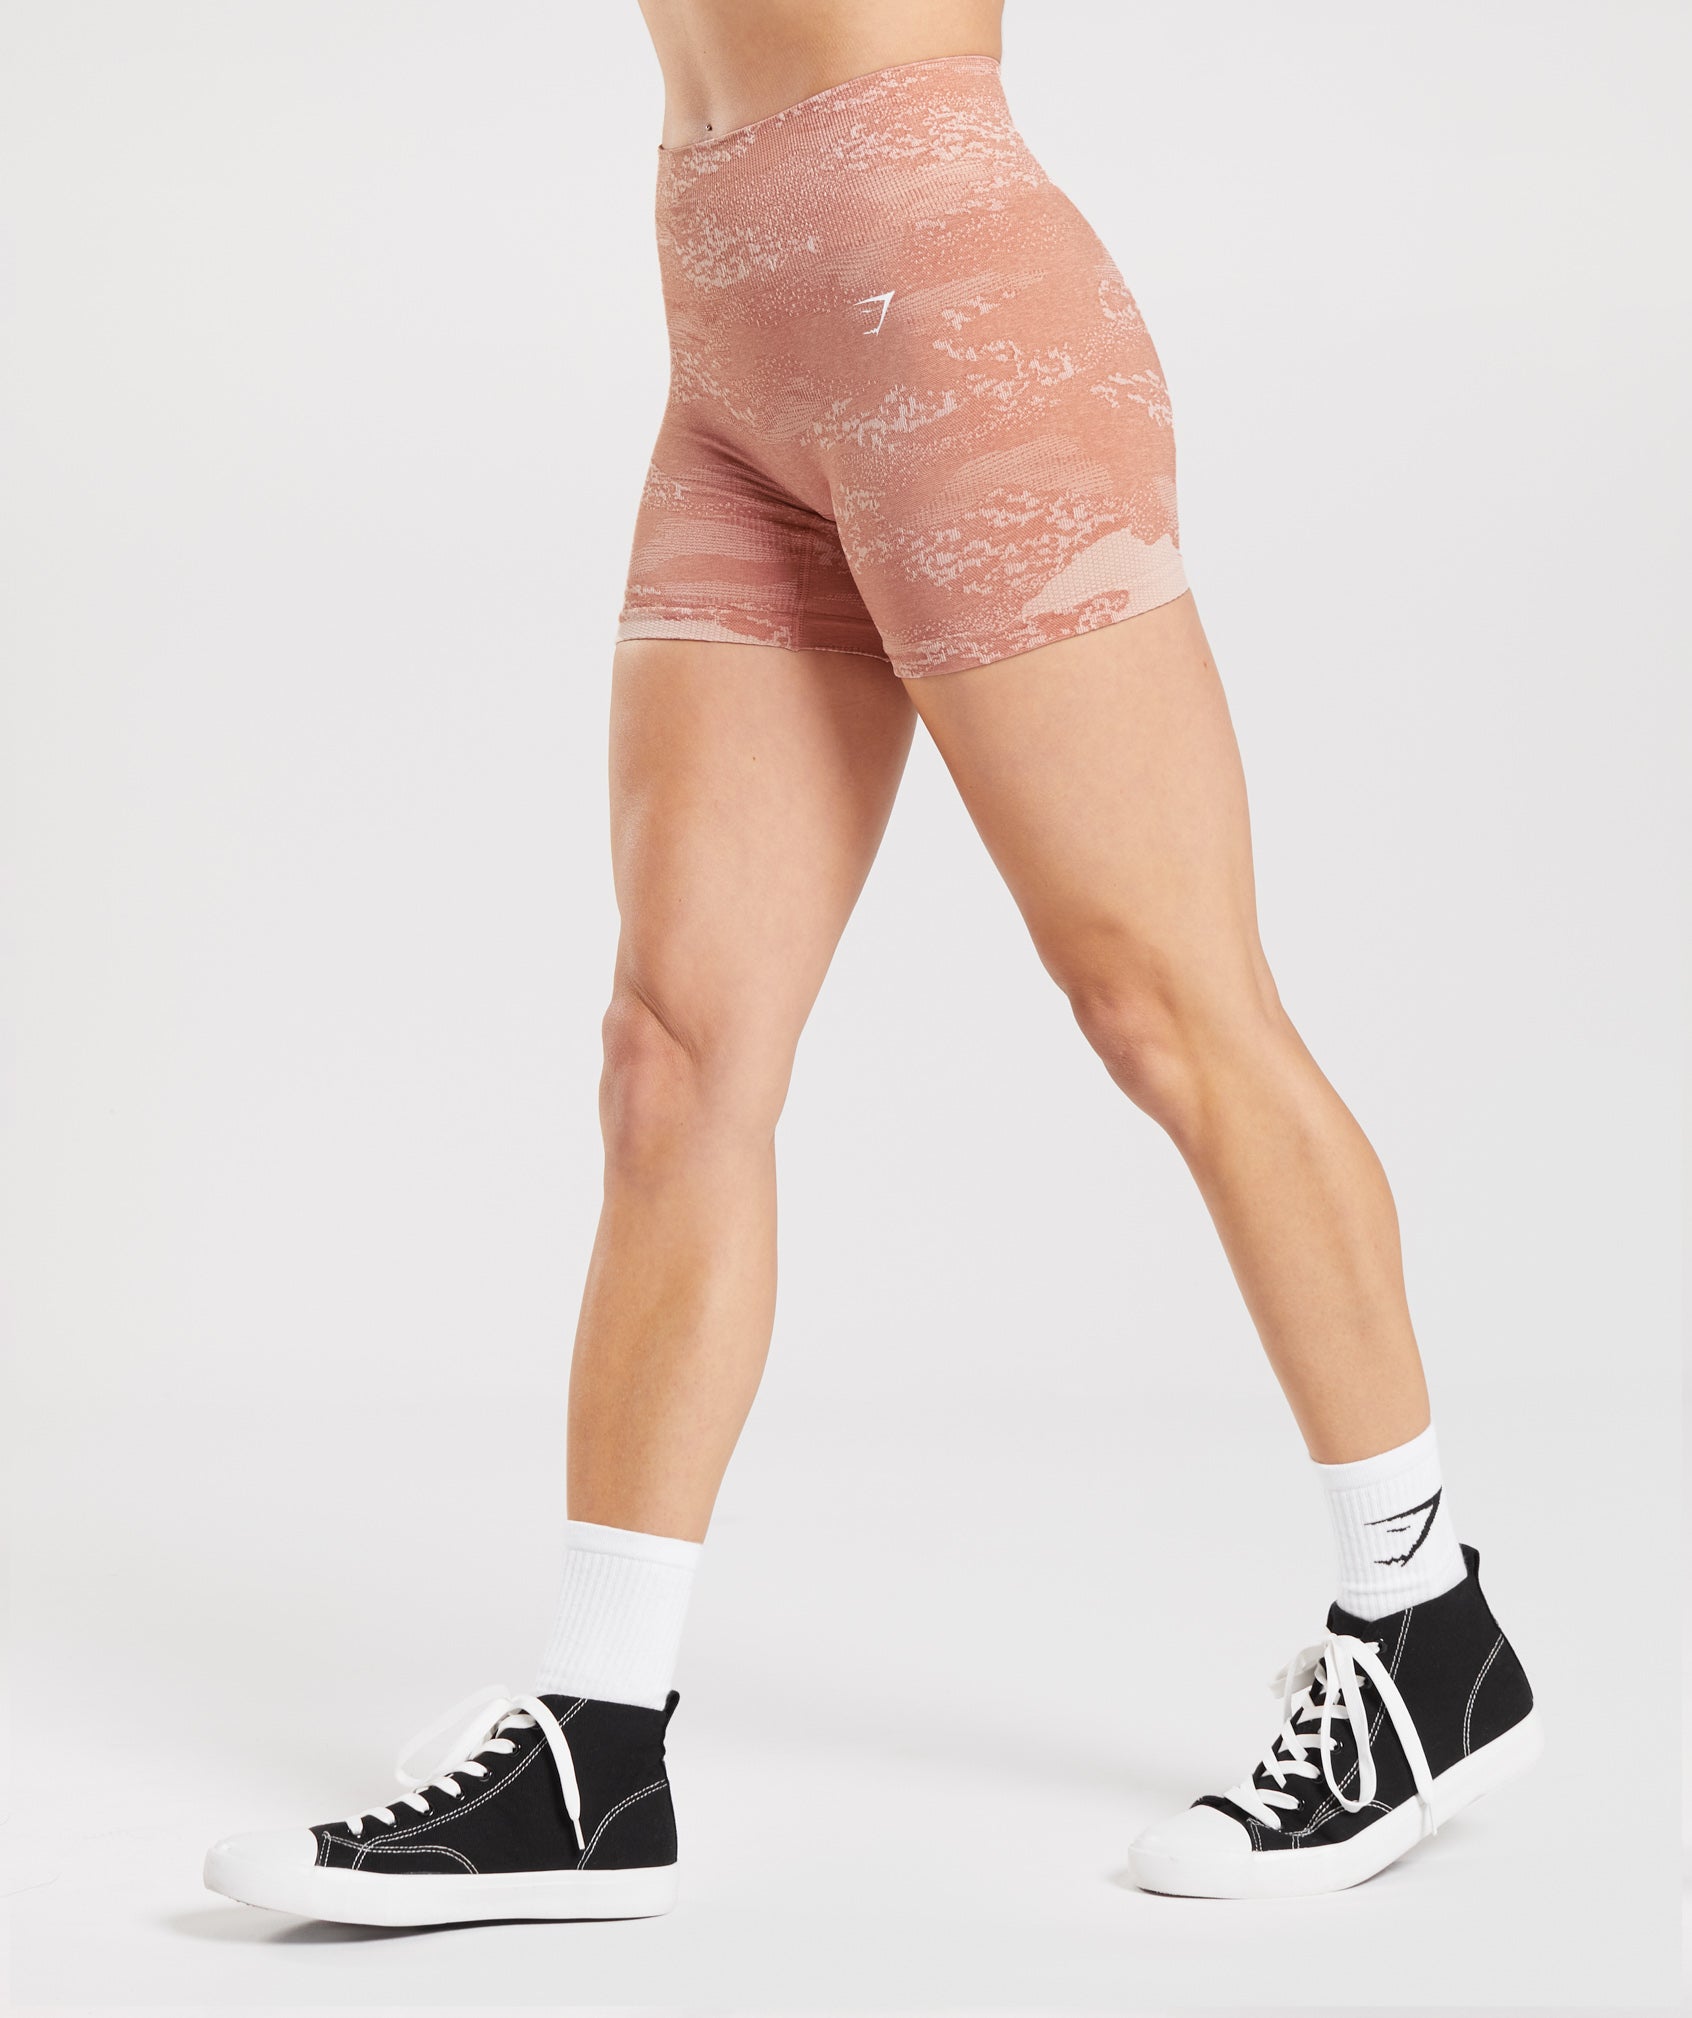 Adapt Camo Seamless Shorts in Misty Pink/Hazy Pink - view 3